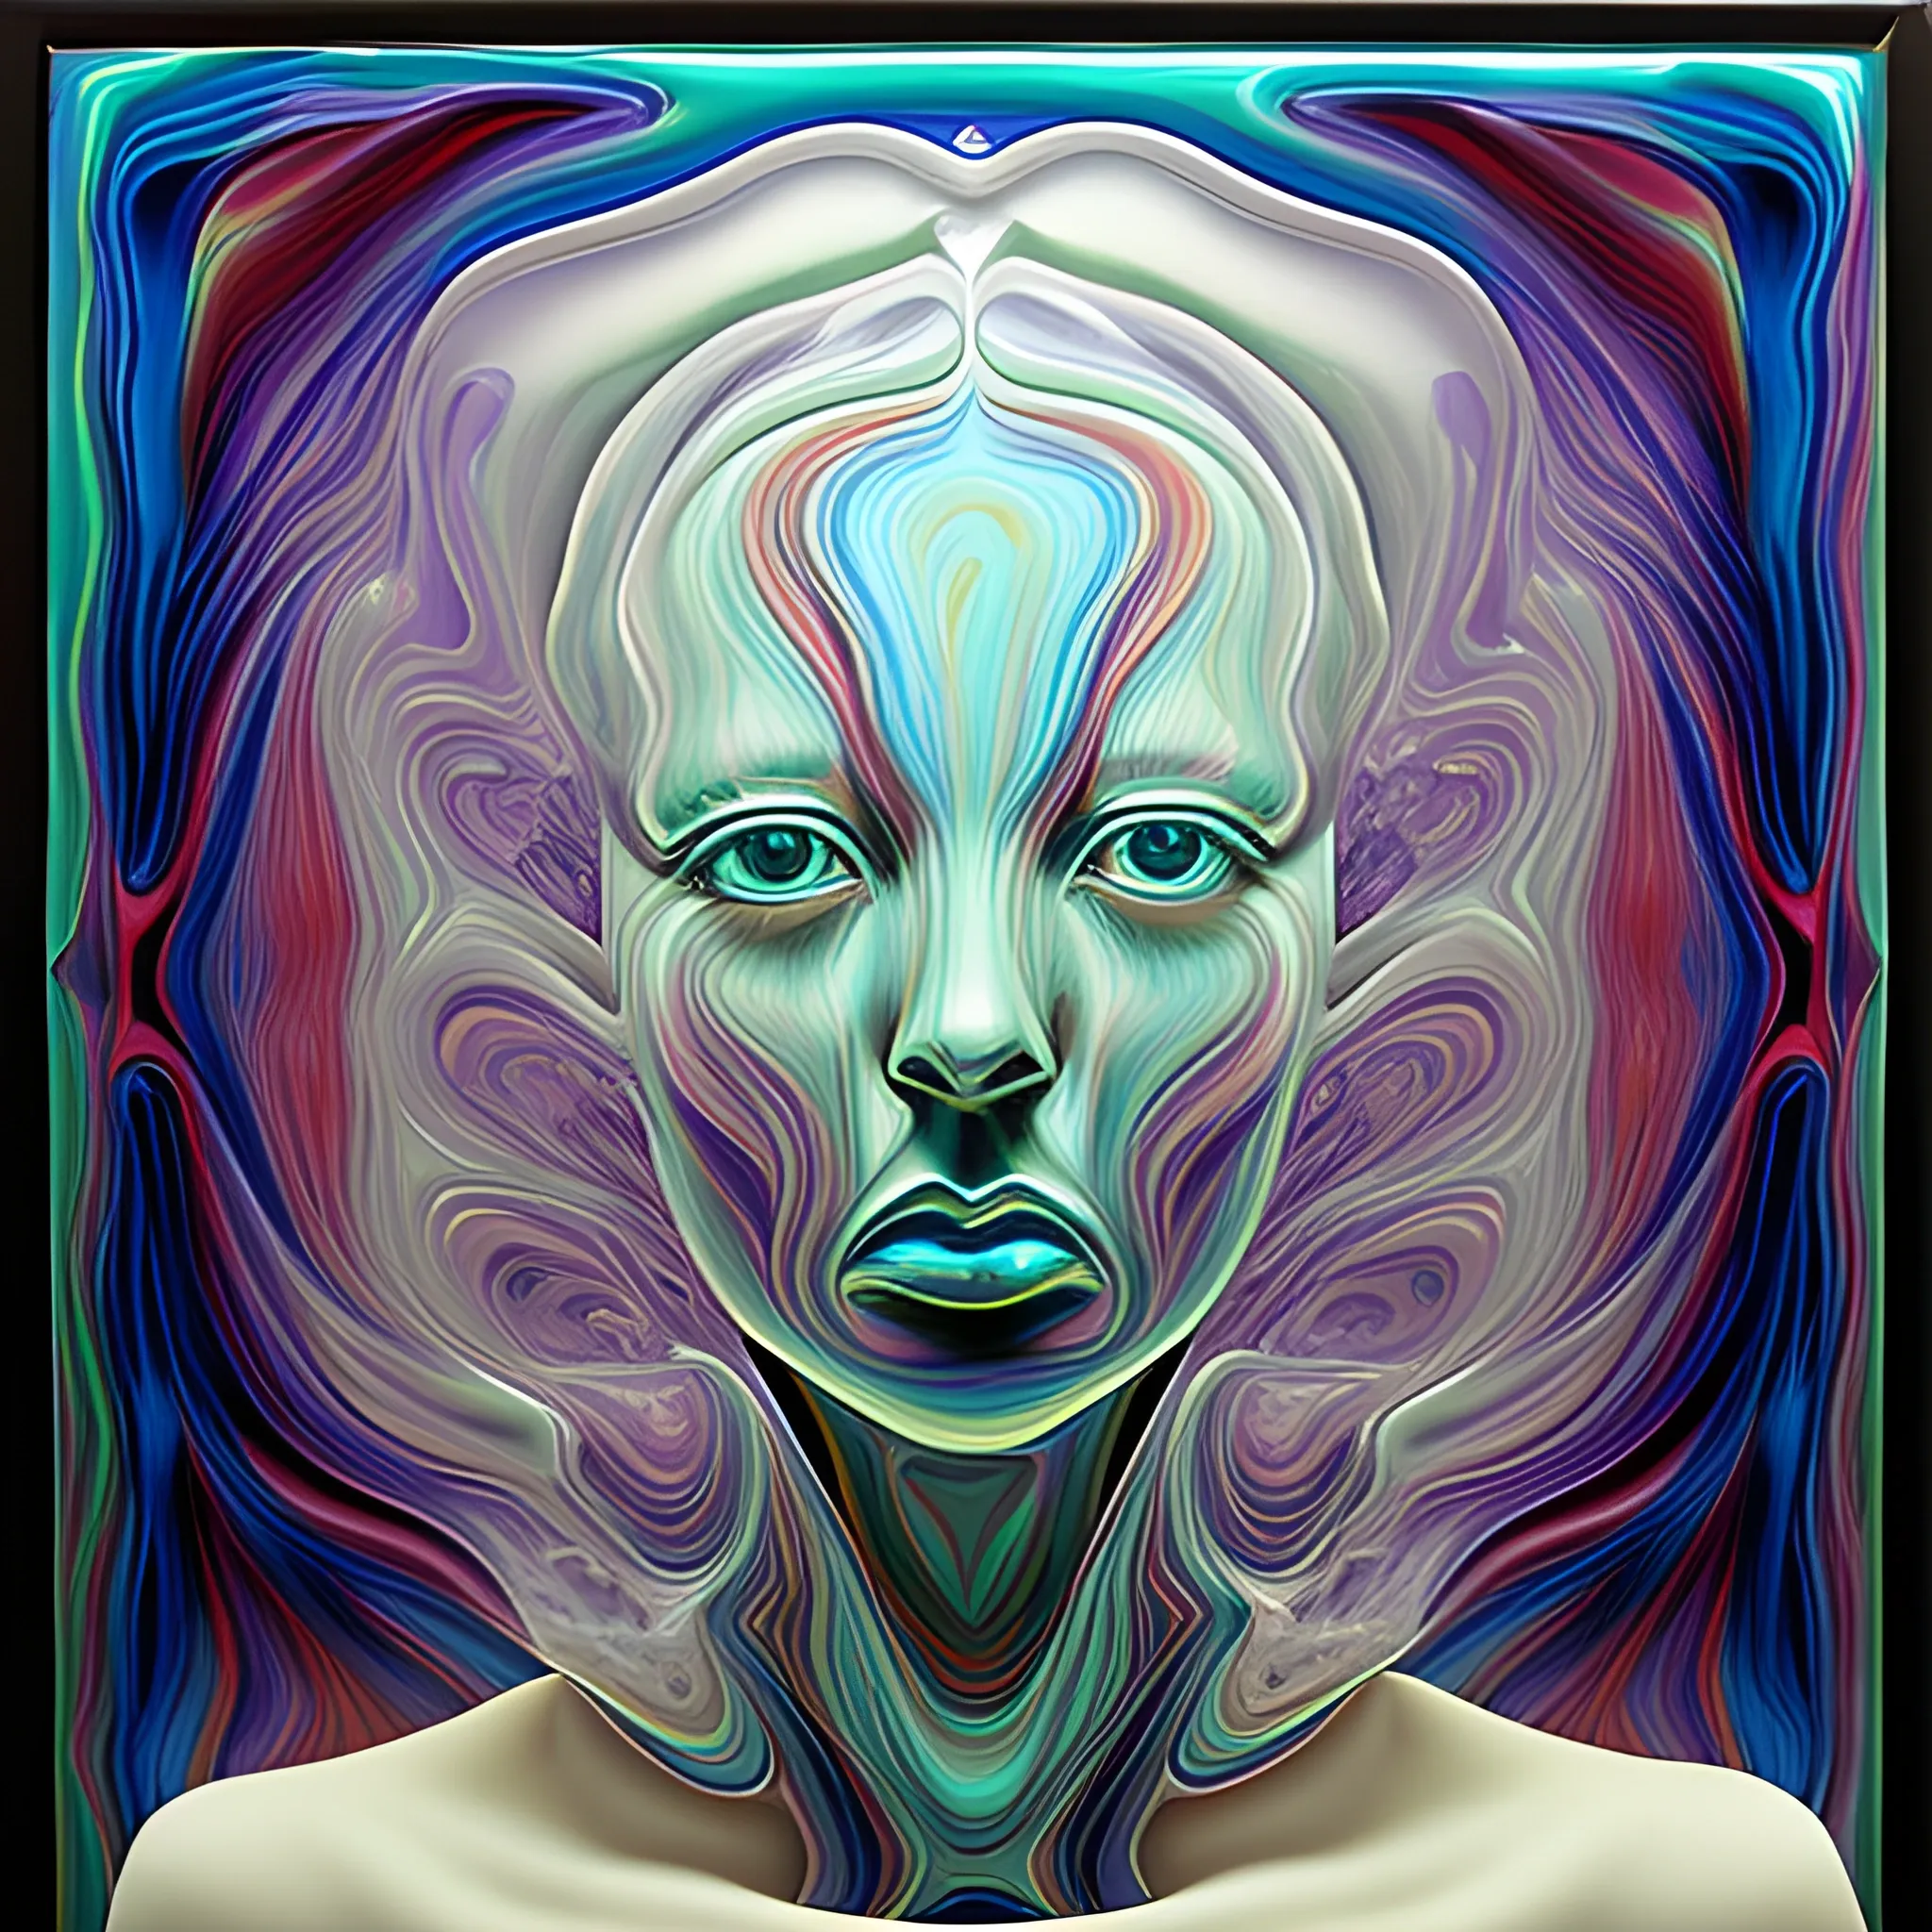 Female portrait made of fluid glass, work of a surrealist master, Trippy